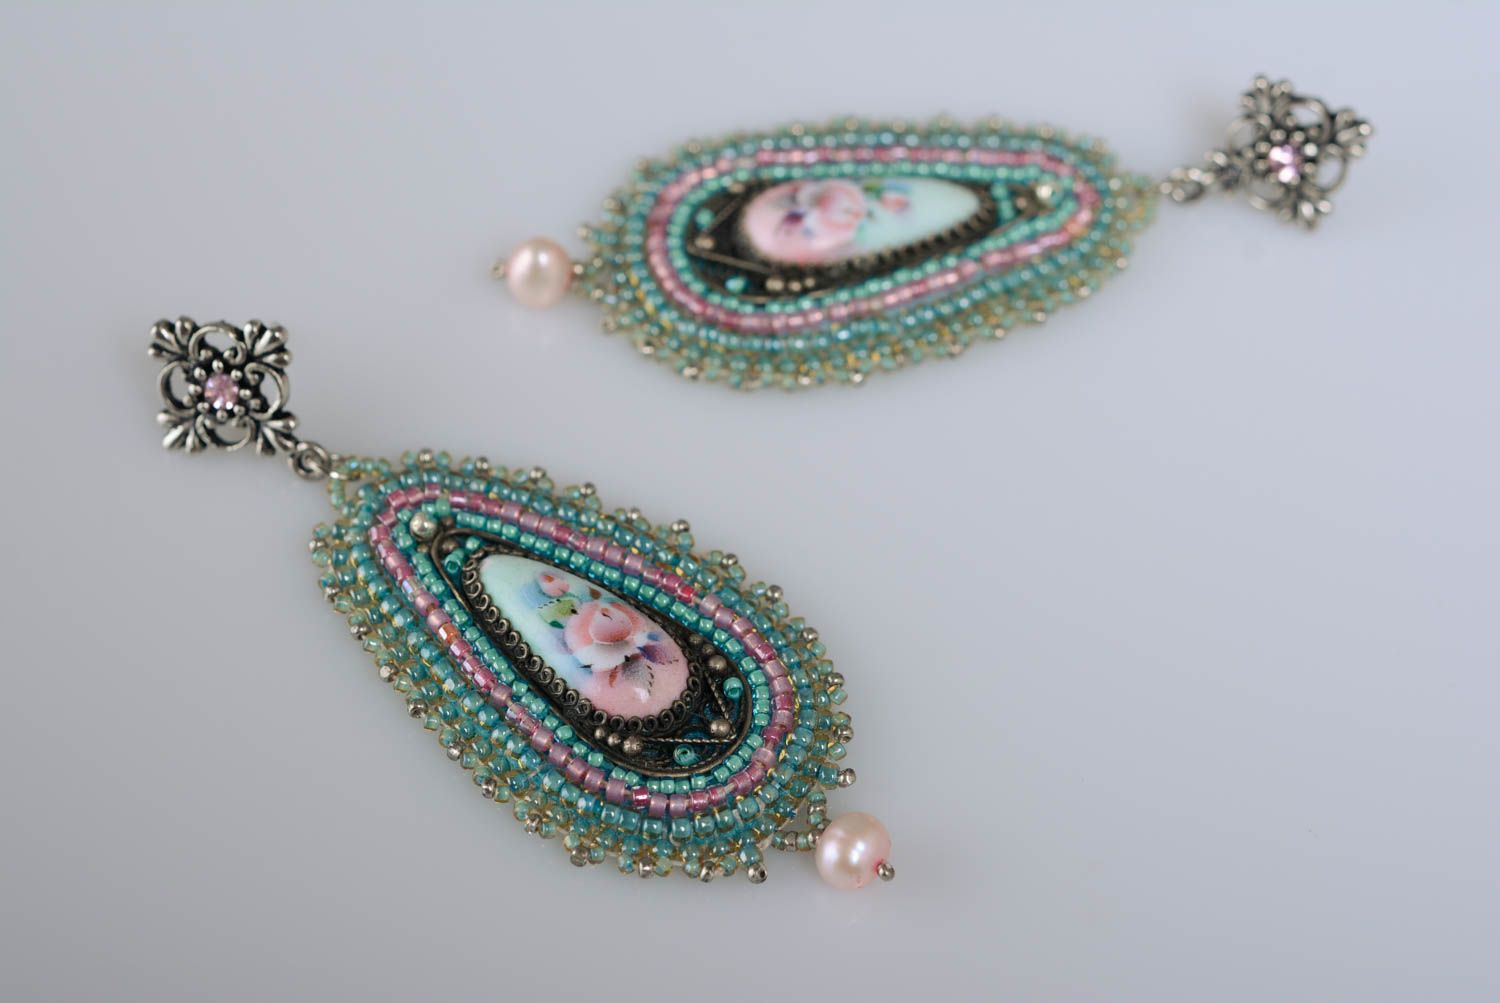 Handmade vintage bead embroidered dangling earrings with natural stones photo 2